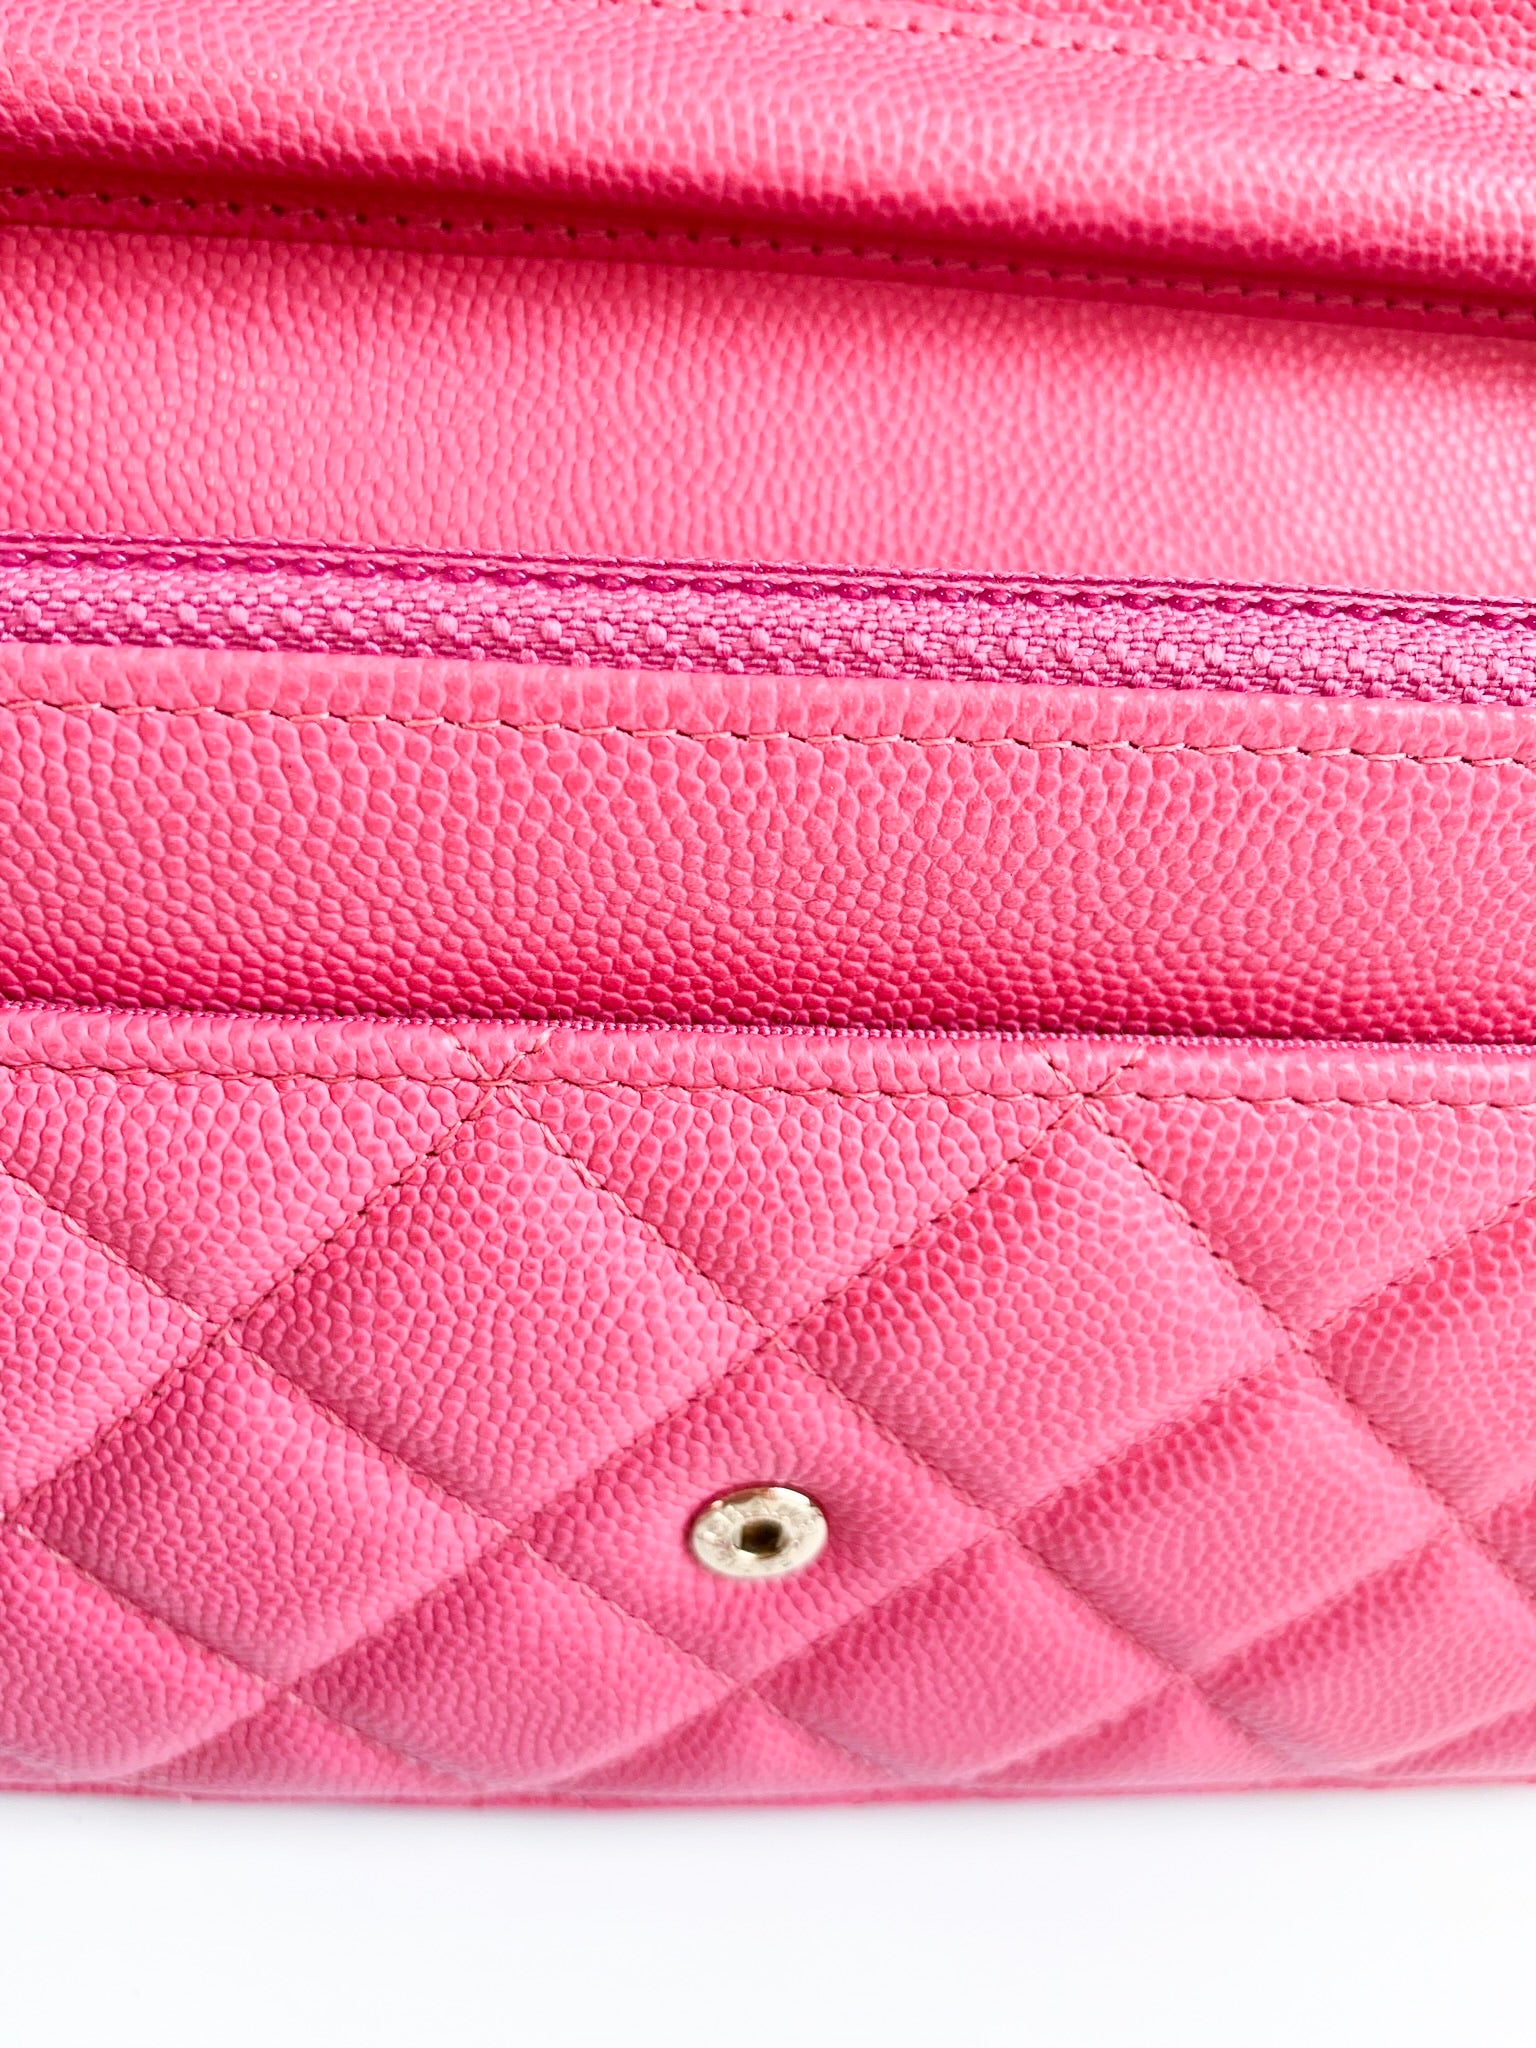 Chanel Pink Quilted Caviar Compact Wallet On Chain, myGemma, SG